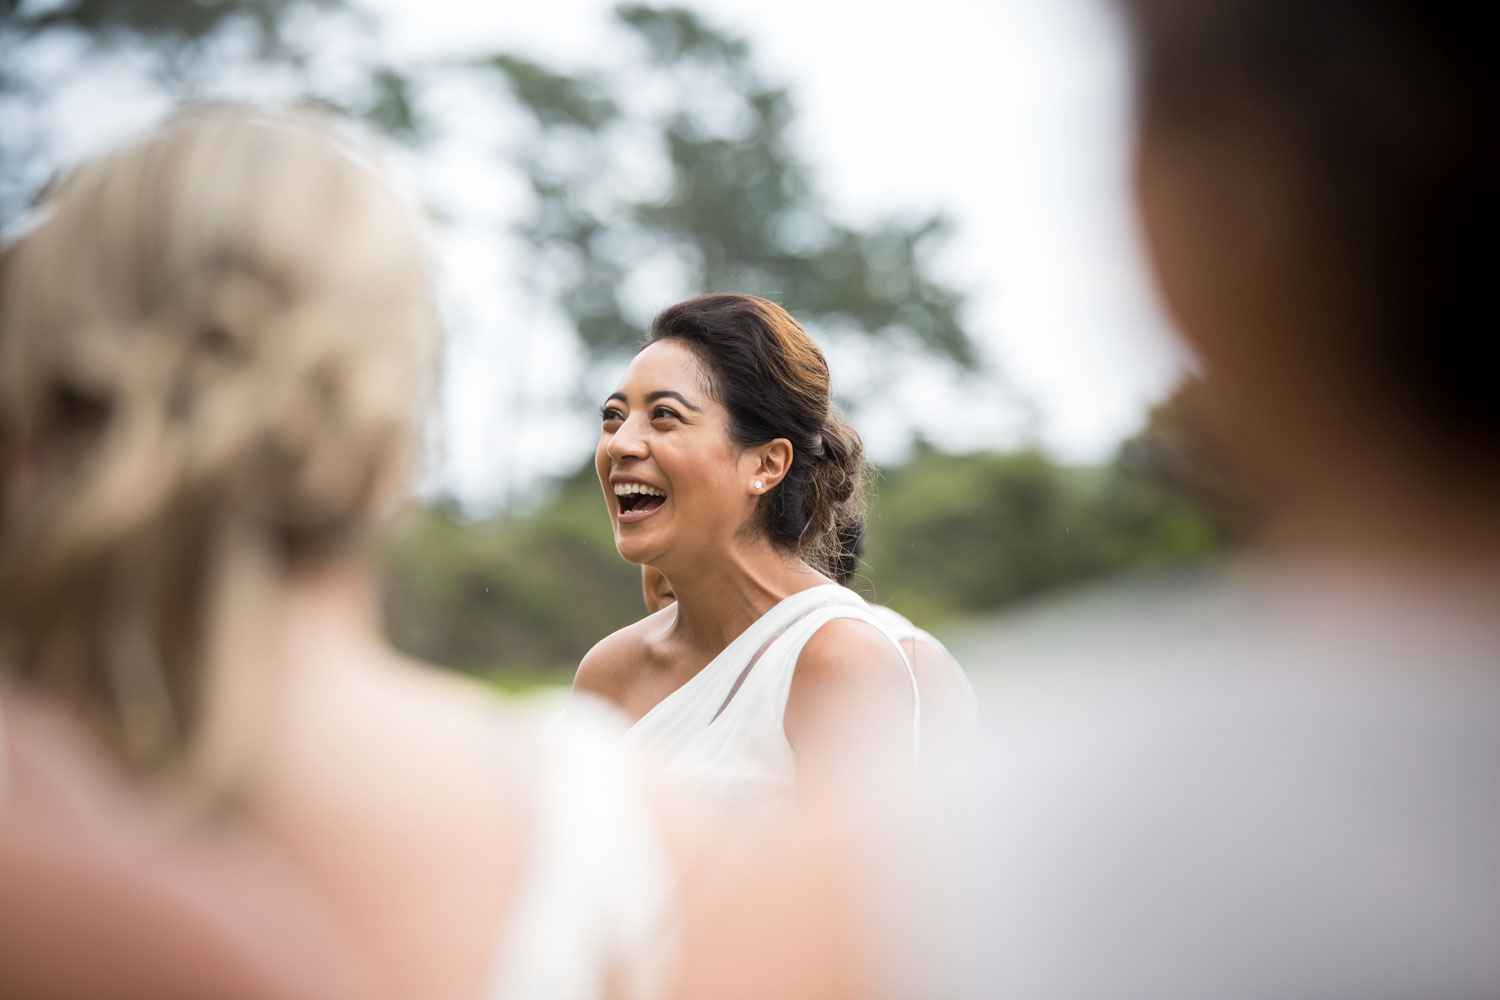 gracehill auckland wedding bridemaid laughing during the ceremony